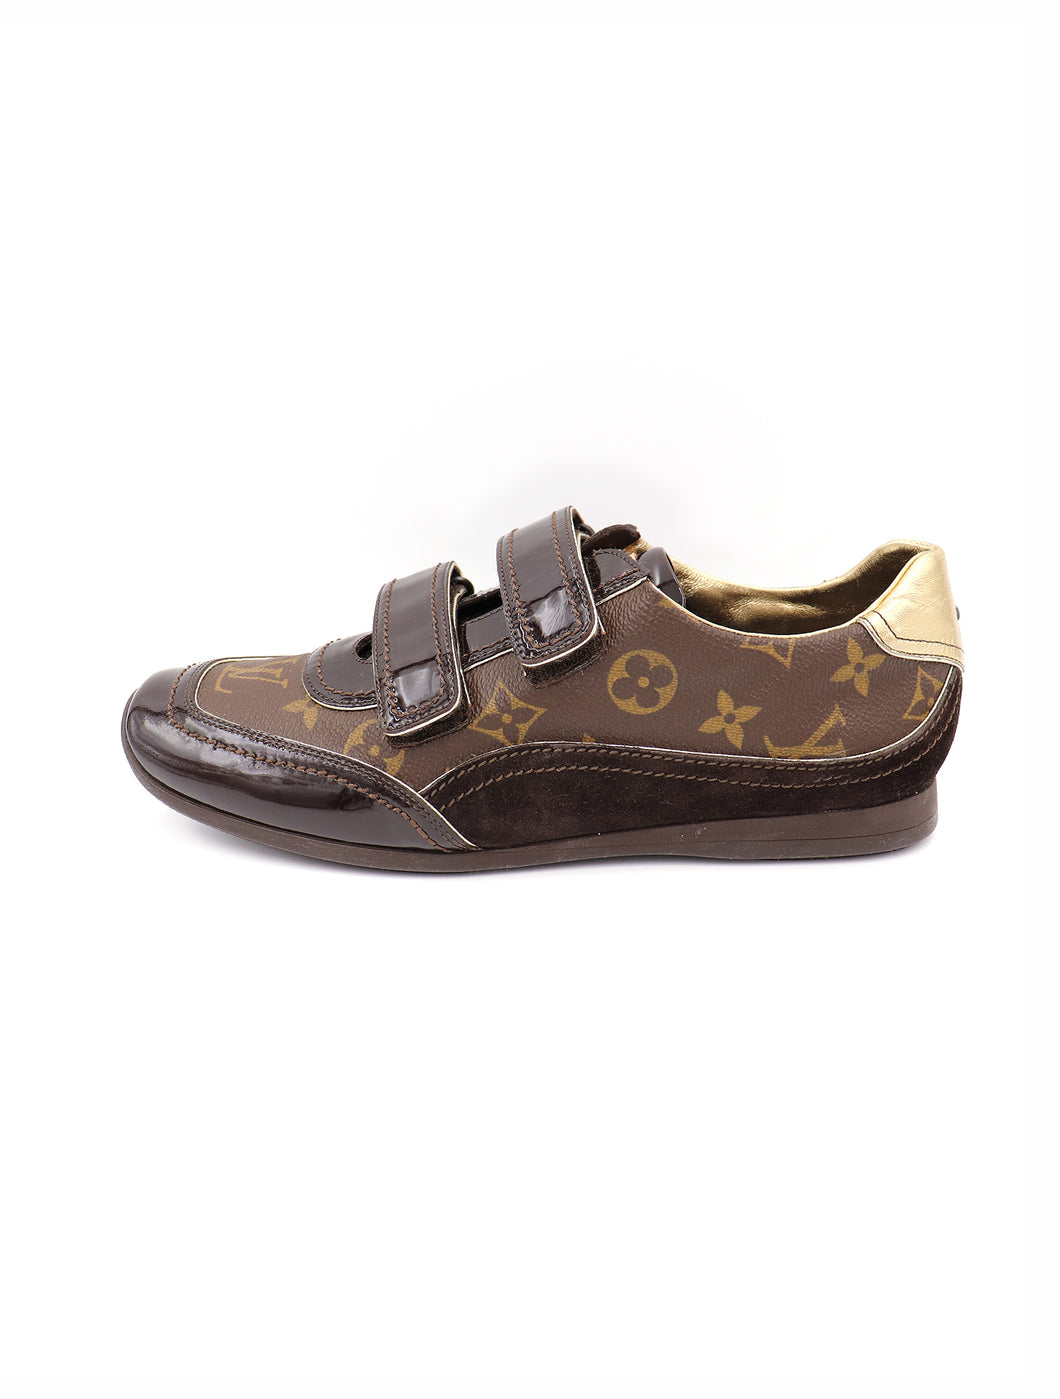 Louis Vuitton Brown Suede And Patent Leather Low Top Sneaker Size